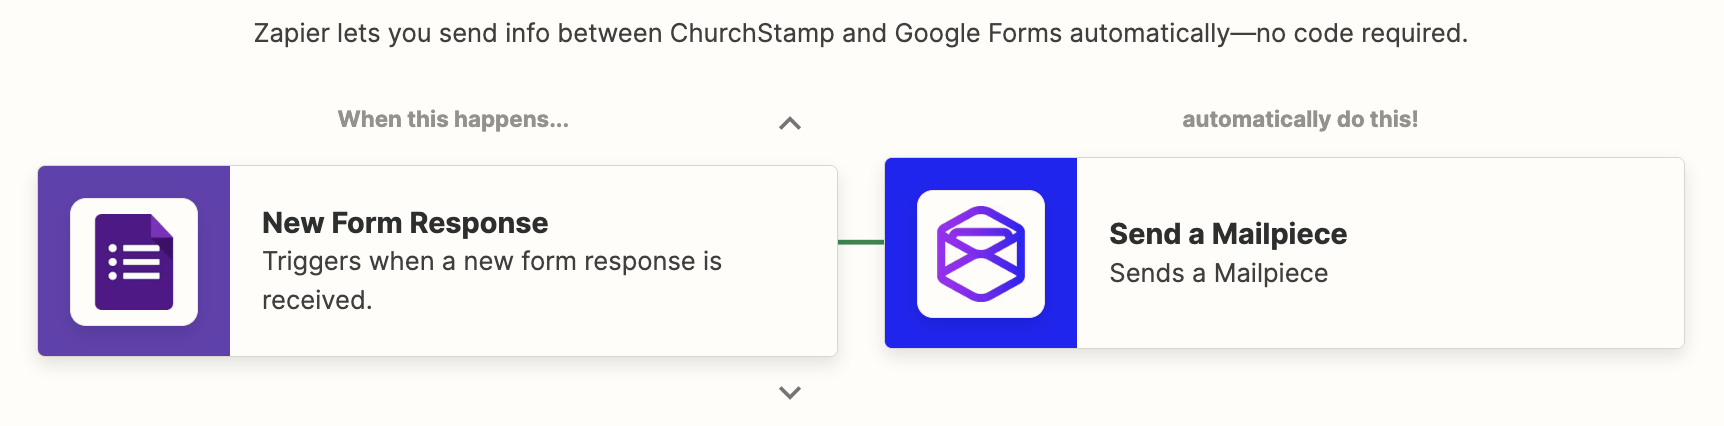 Church Stamp integrates with Google Forms